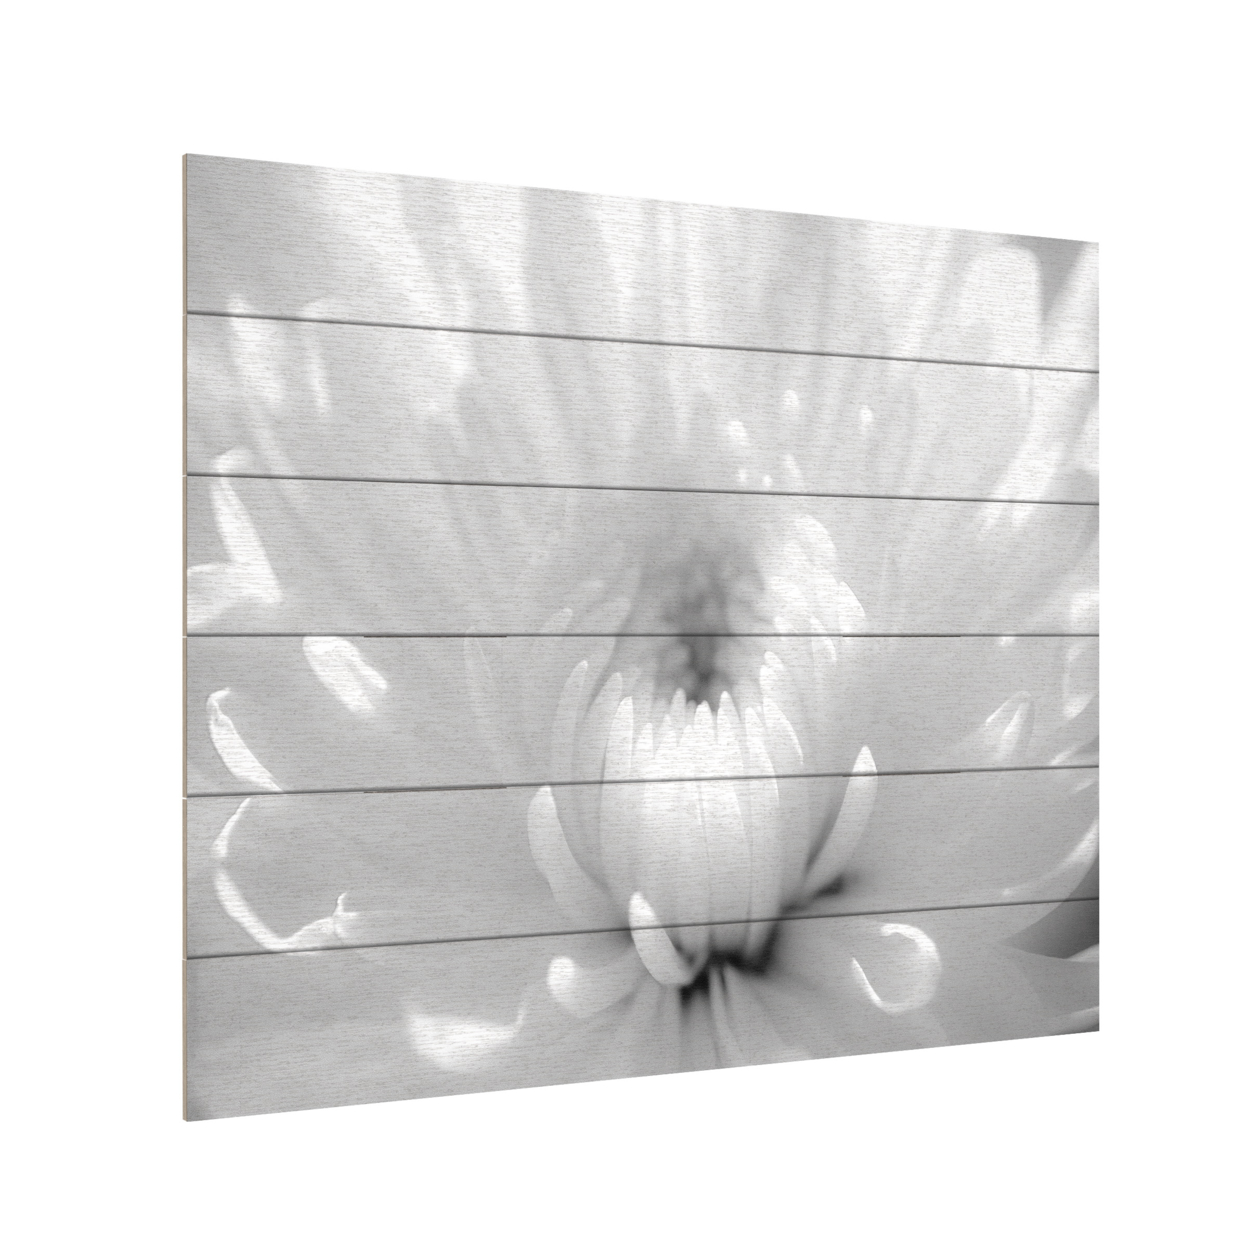 Wooden Slat Art 18 X 22 Inches Titled Infrared Flower 2 Ready To Hang Home Decor Picture